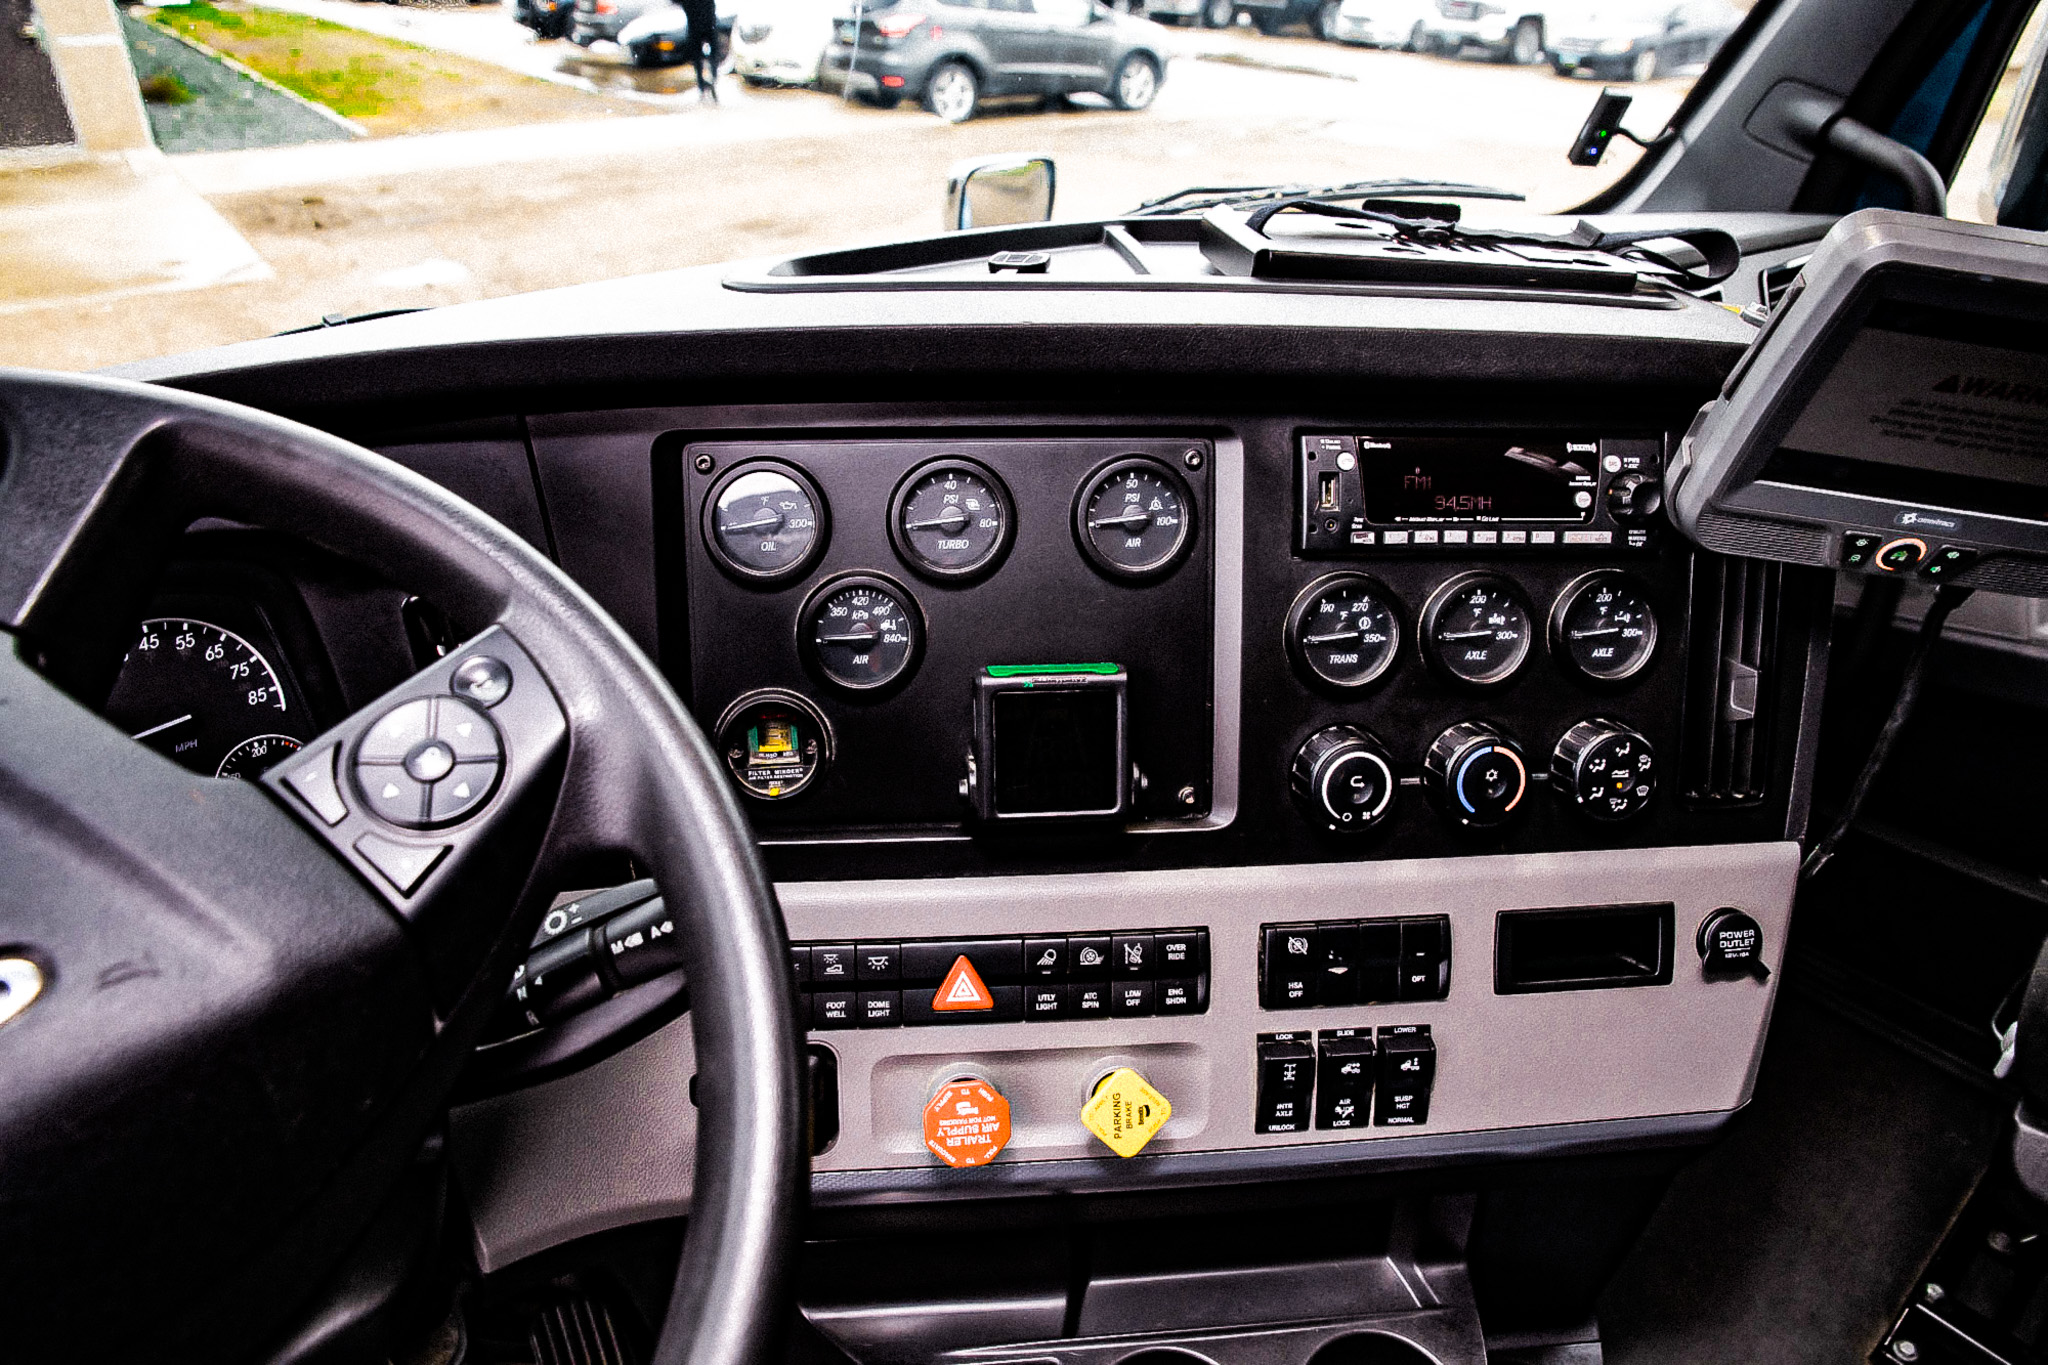 Behind the wheel of a Great Plains Transport commercial vehicle